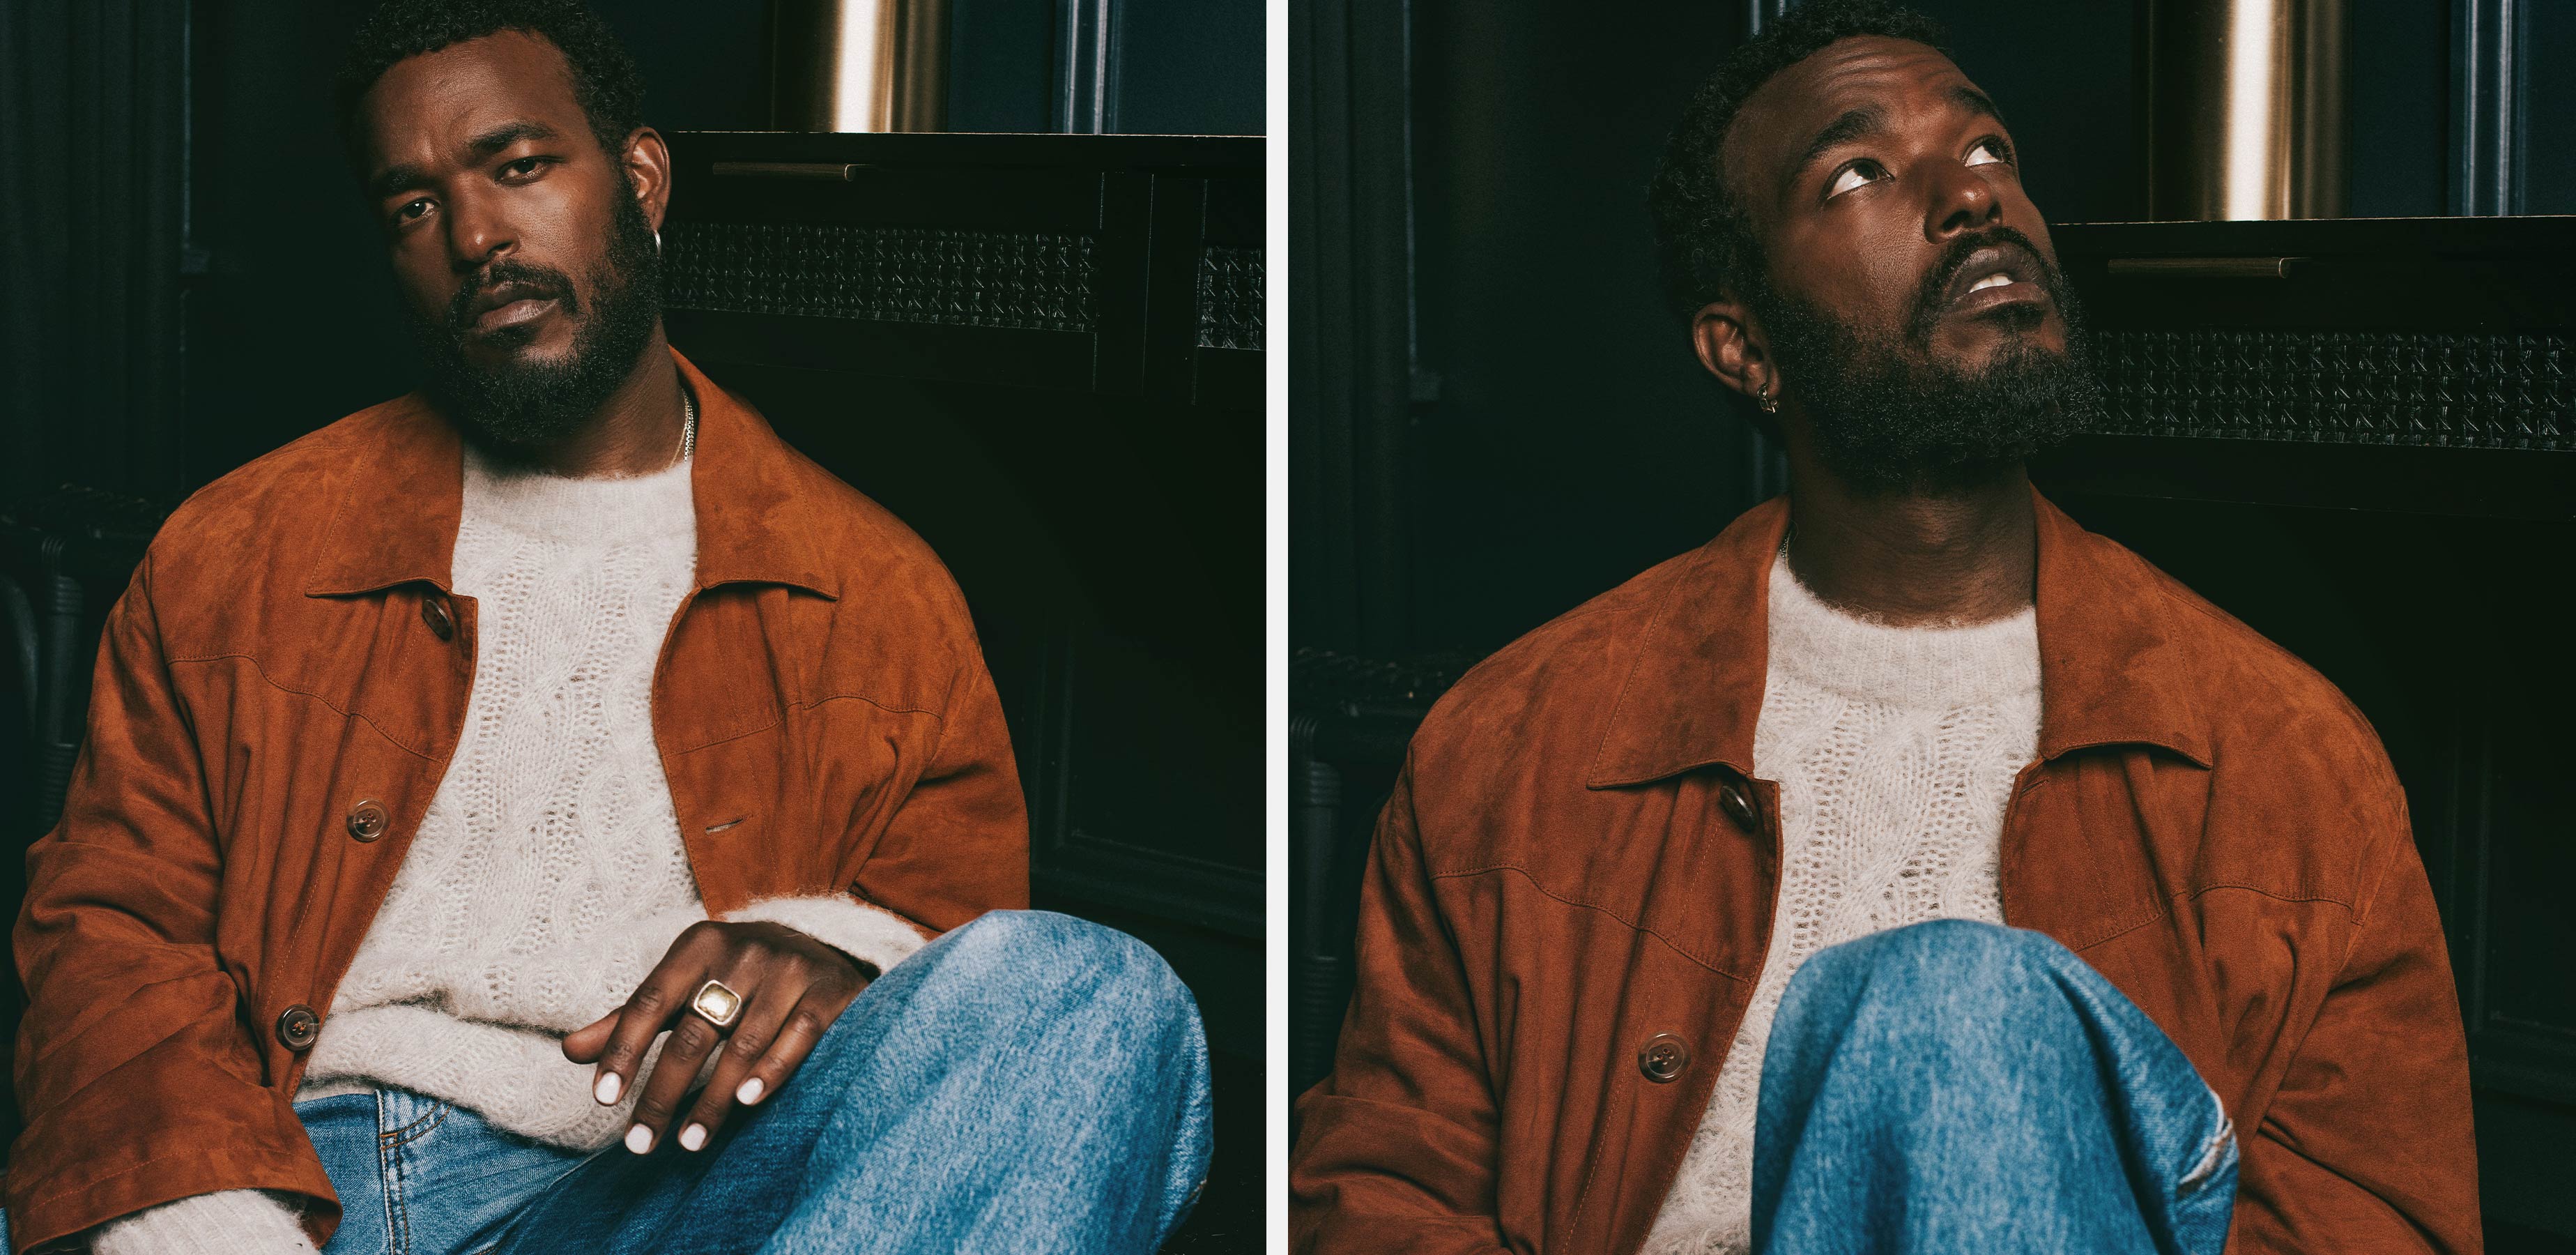 The actor Luke James lounging in an NB44 jacket and Isabel Marant sweater during a photoshoot